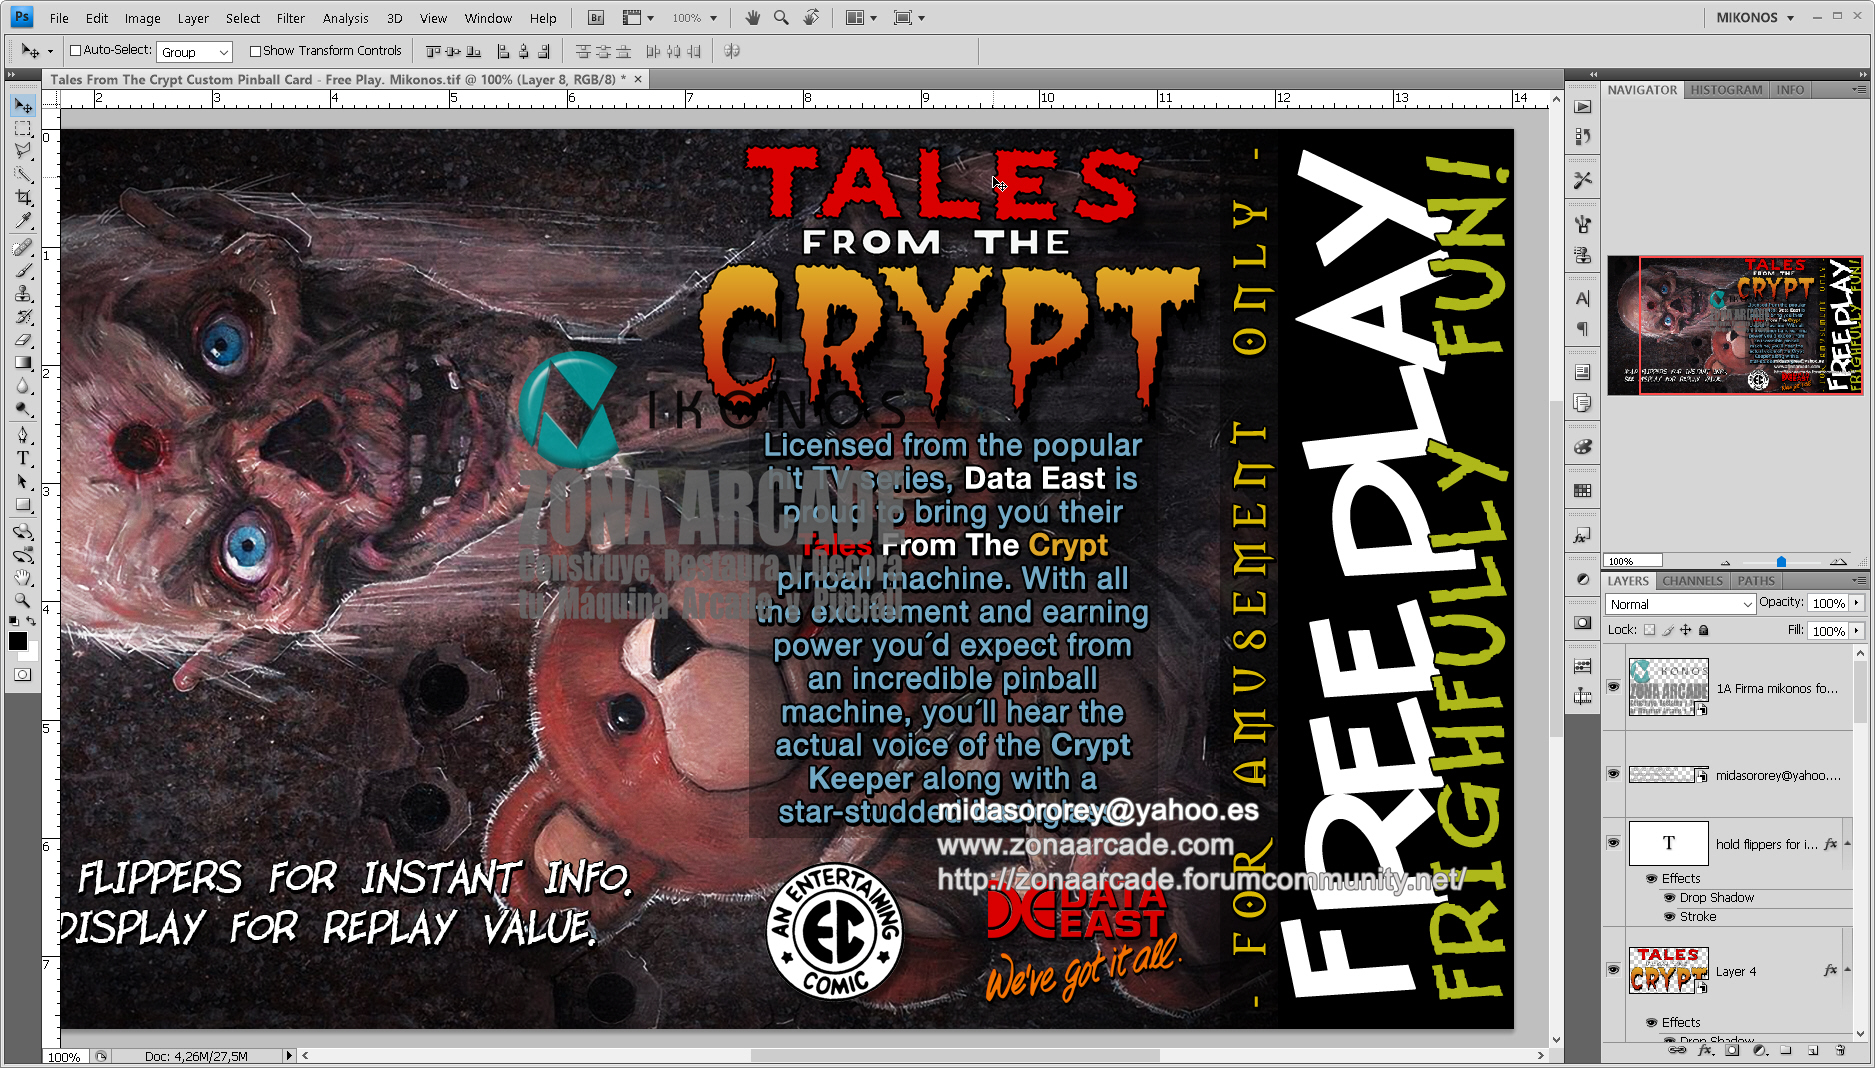 Tales From The Crypt%20Custom%20Pinball%20Card%20-%20Free Play.%20Mikonos2